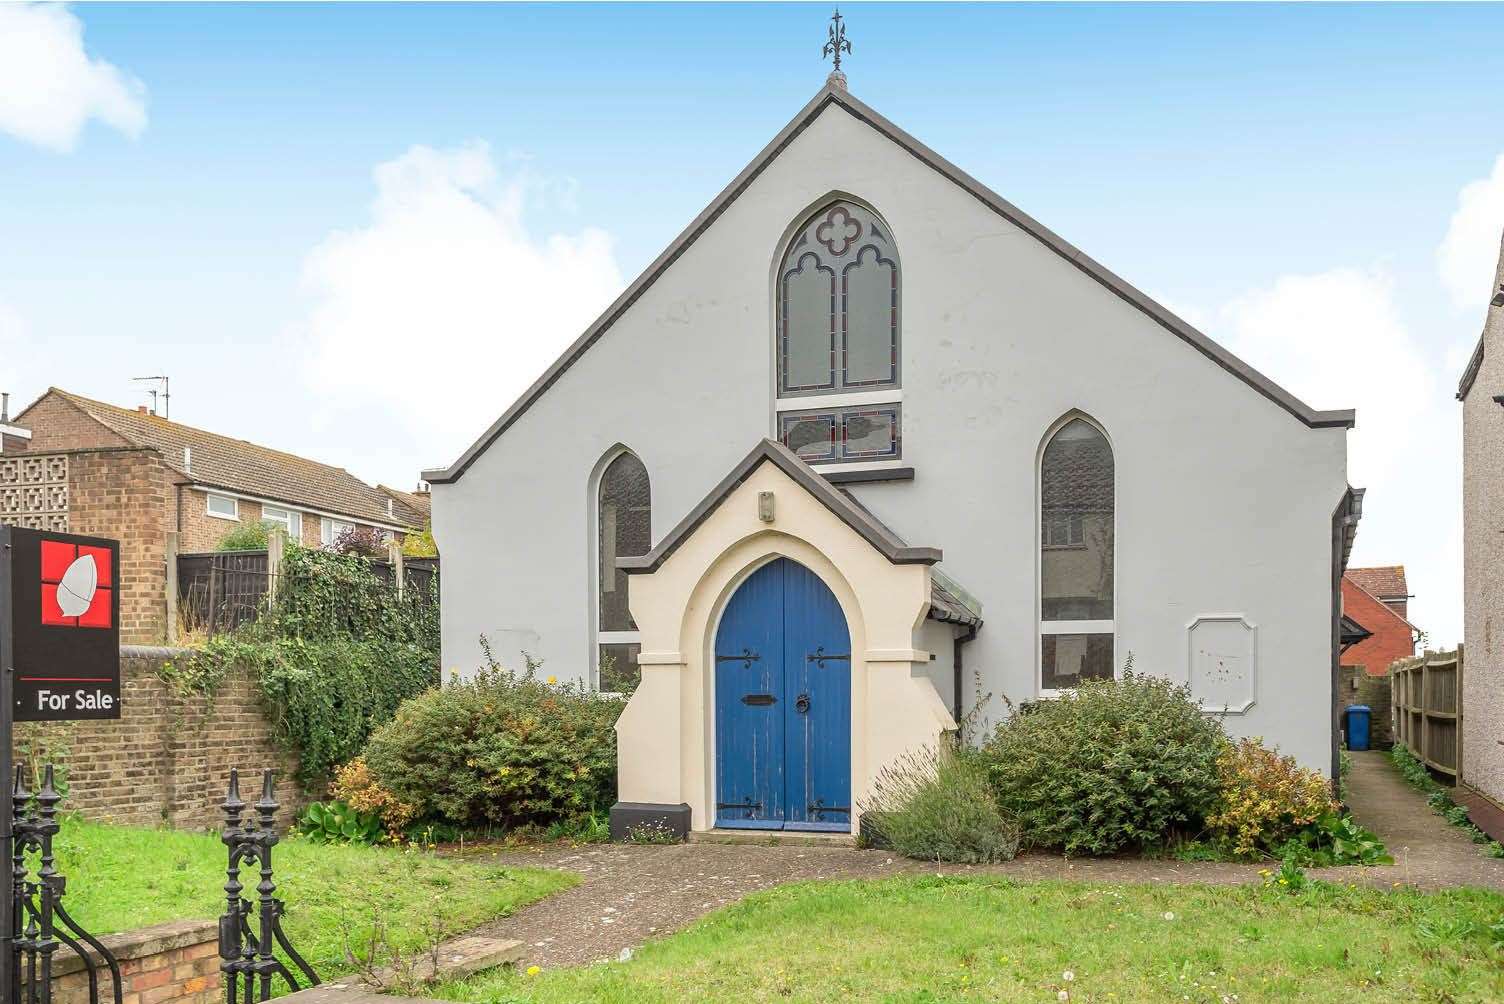 This chapel in Dartford could be yours